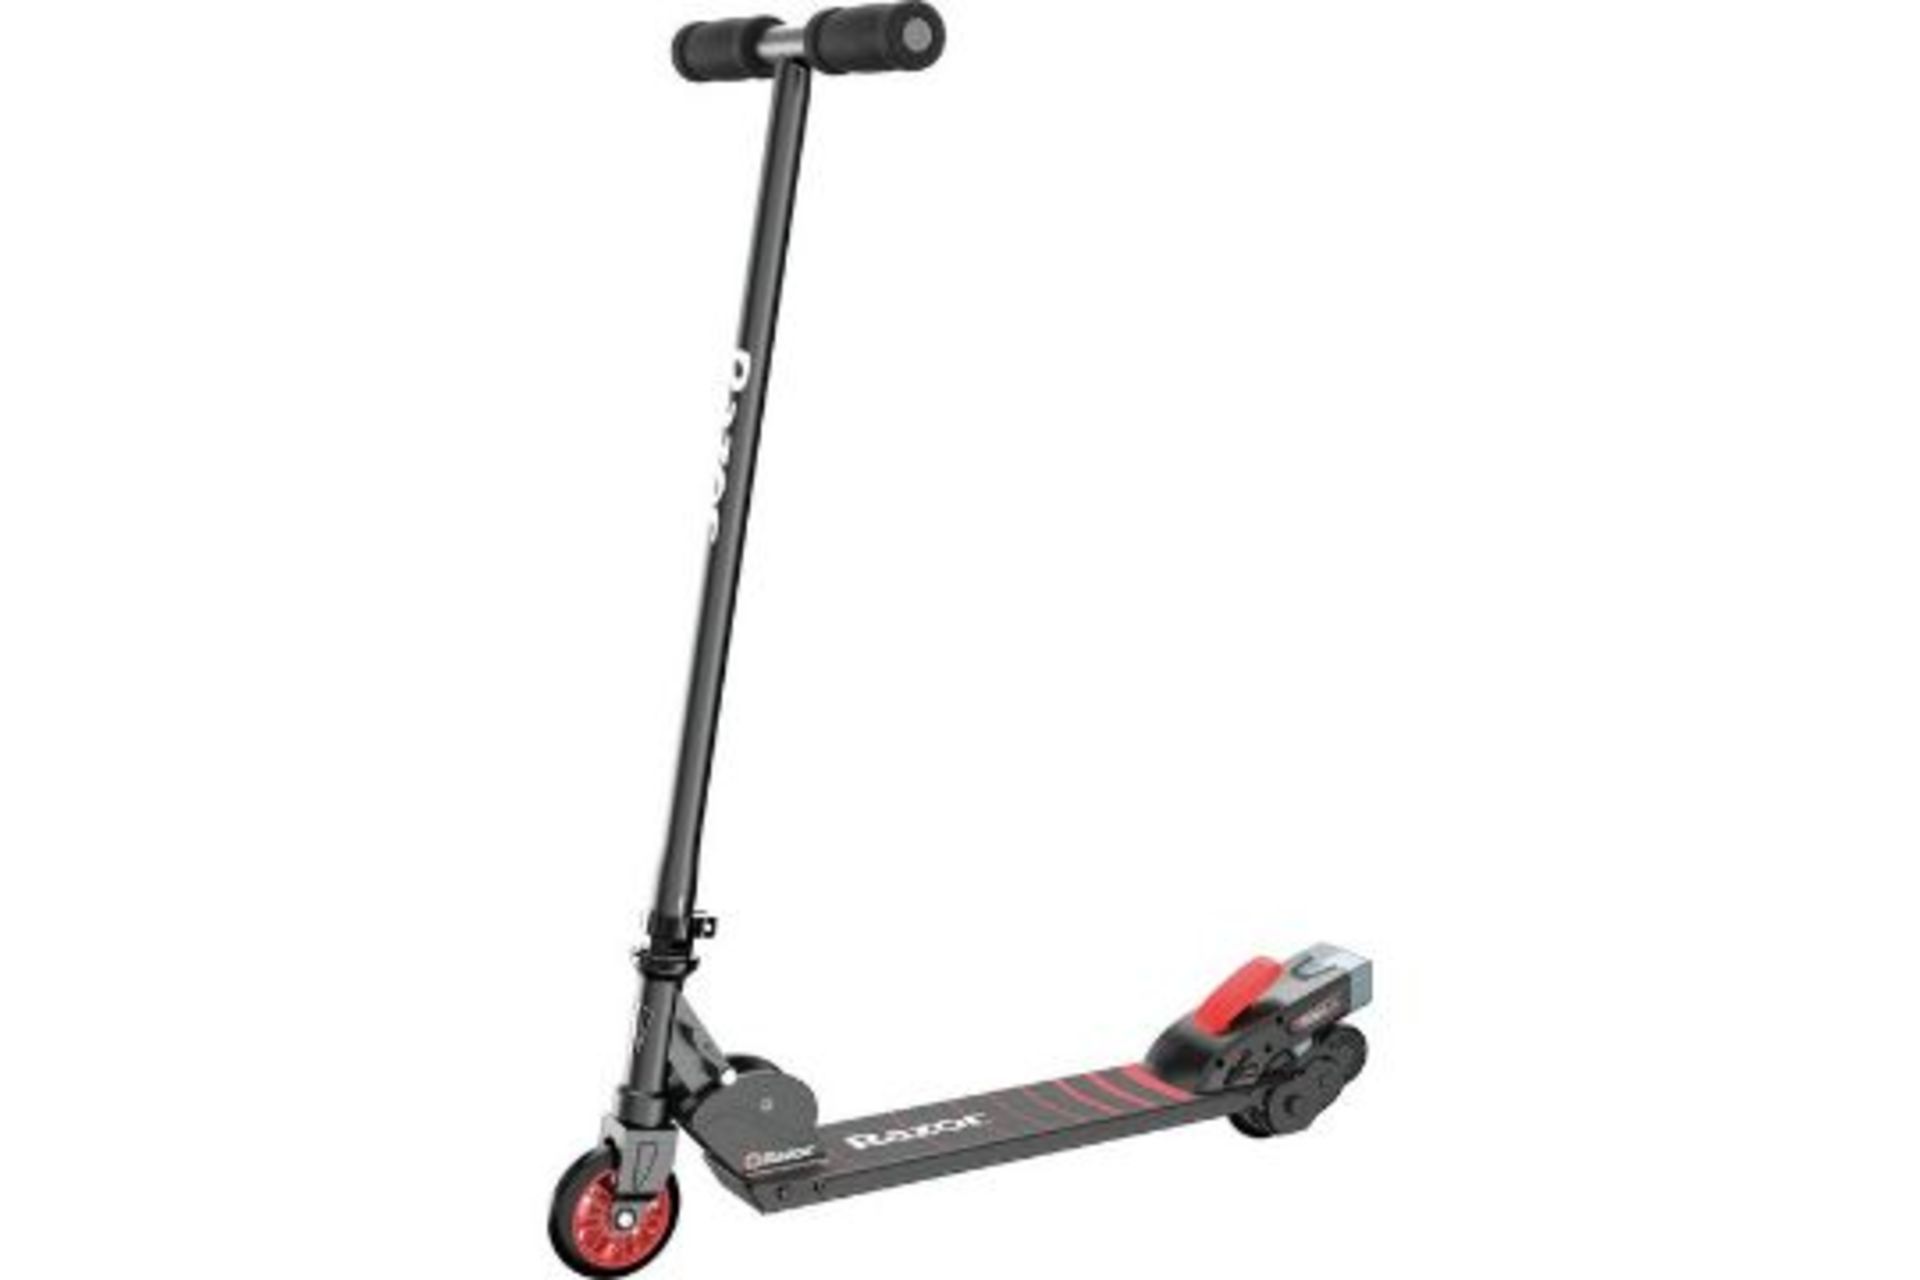 (ex112) Razor Turbo A Black Label Electric Scooter RRP £175.00. Simply step on and kick off to